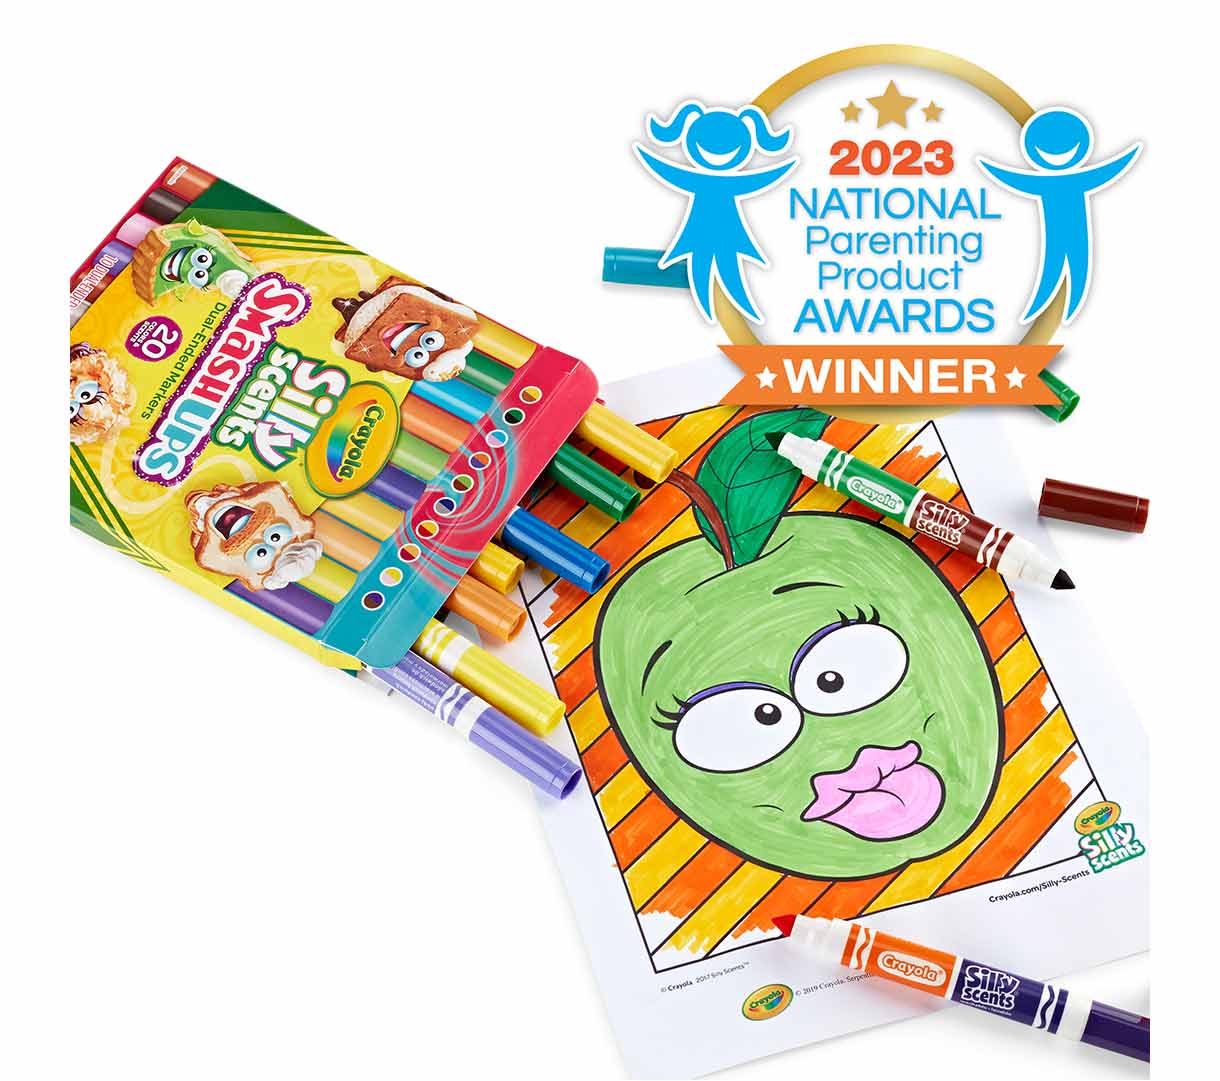 10 Best Markers For Adult Coloring Books 2023, There's One Clear Winner